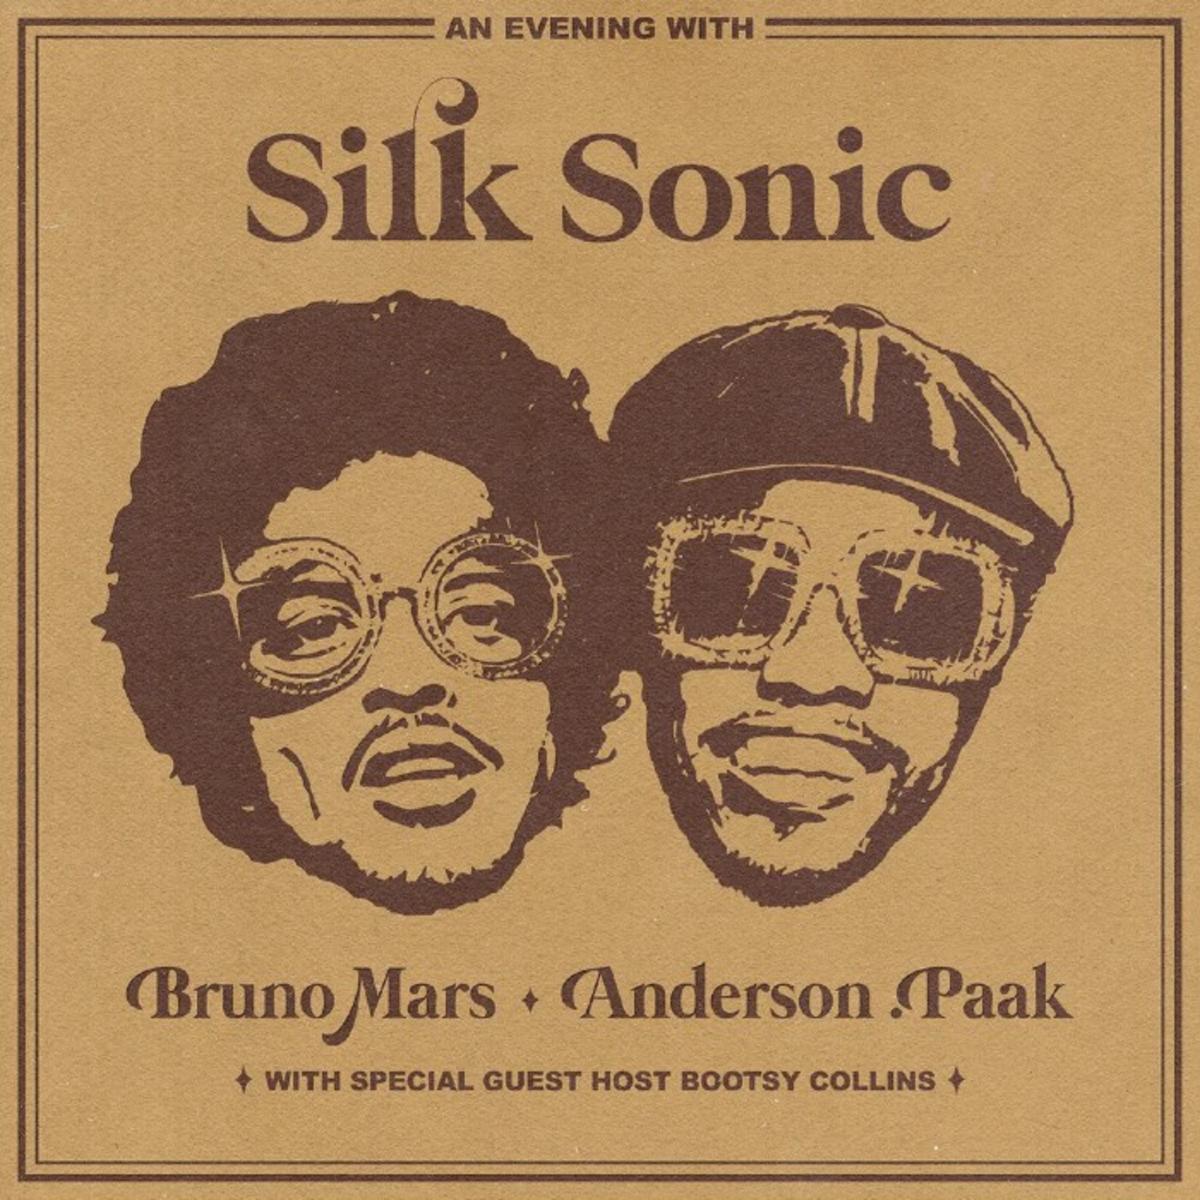 Silk Sonic (Bruno Mars & Anderson .Paak) Bless Us With Nostalgic Vibes On “Leave The Door Open”